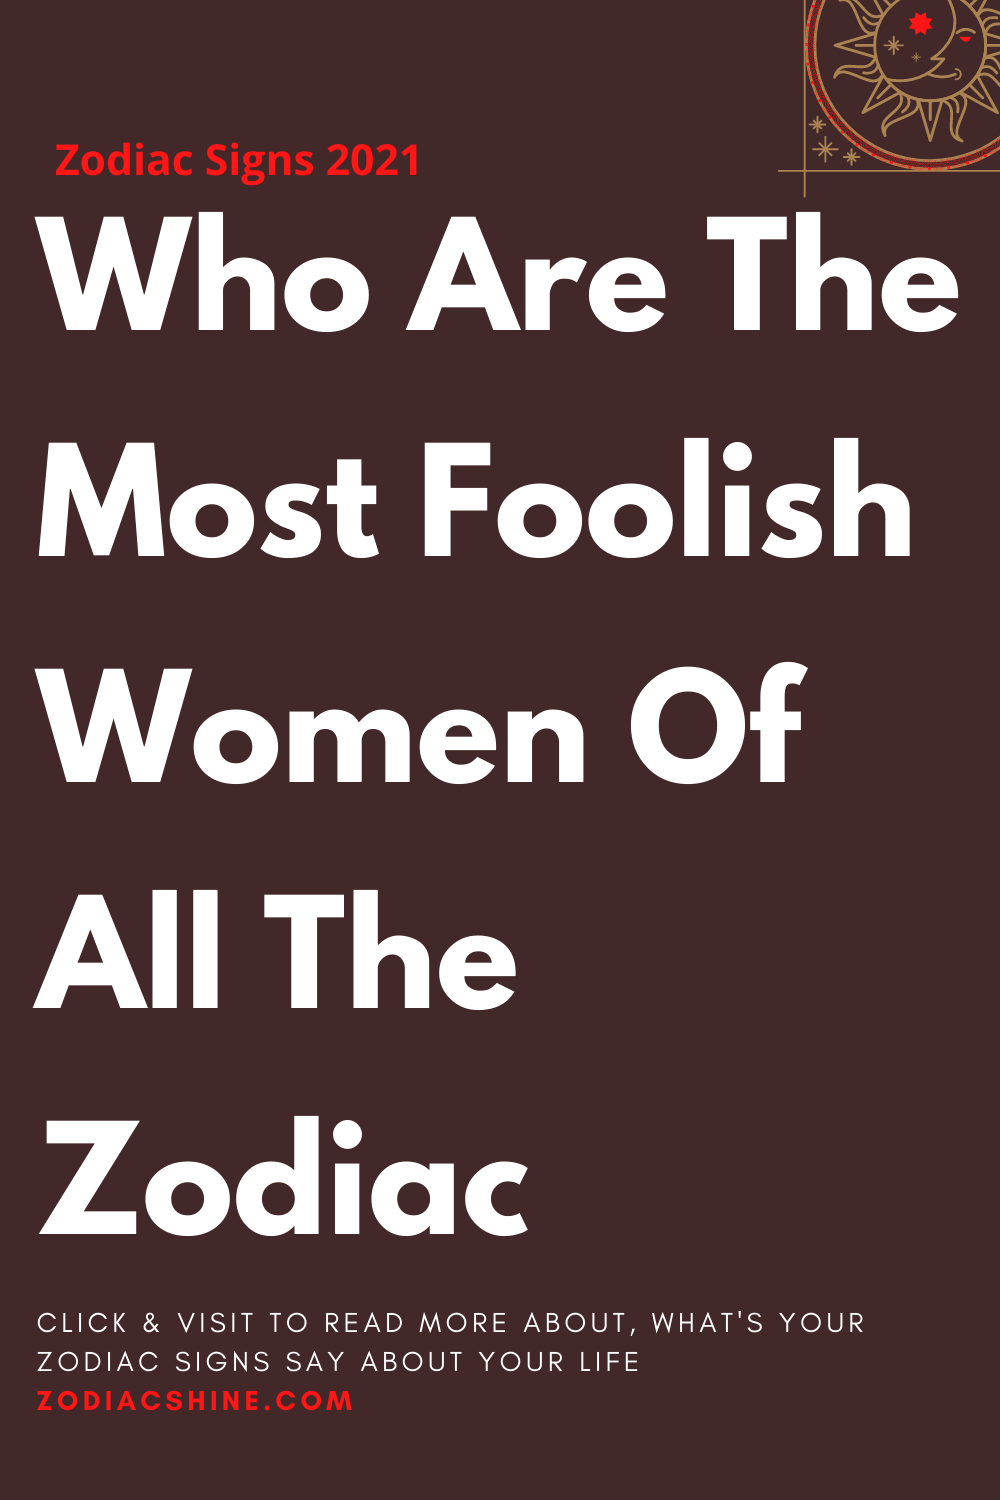 Who Are The Most Foolish Women Of All The Zodiac